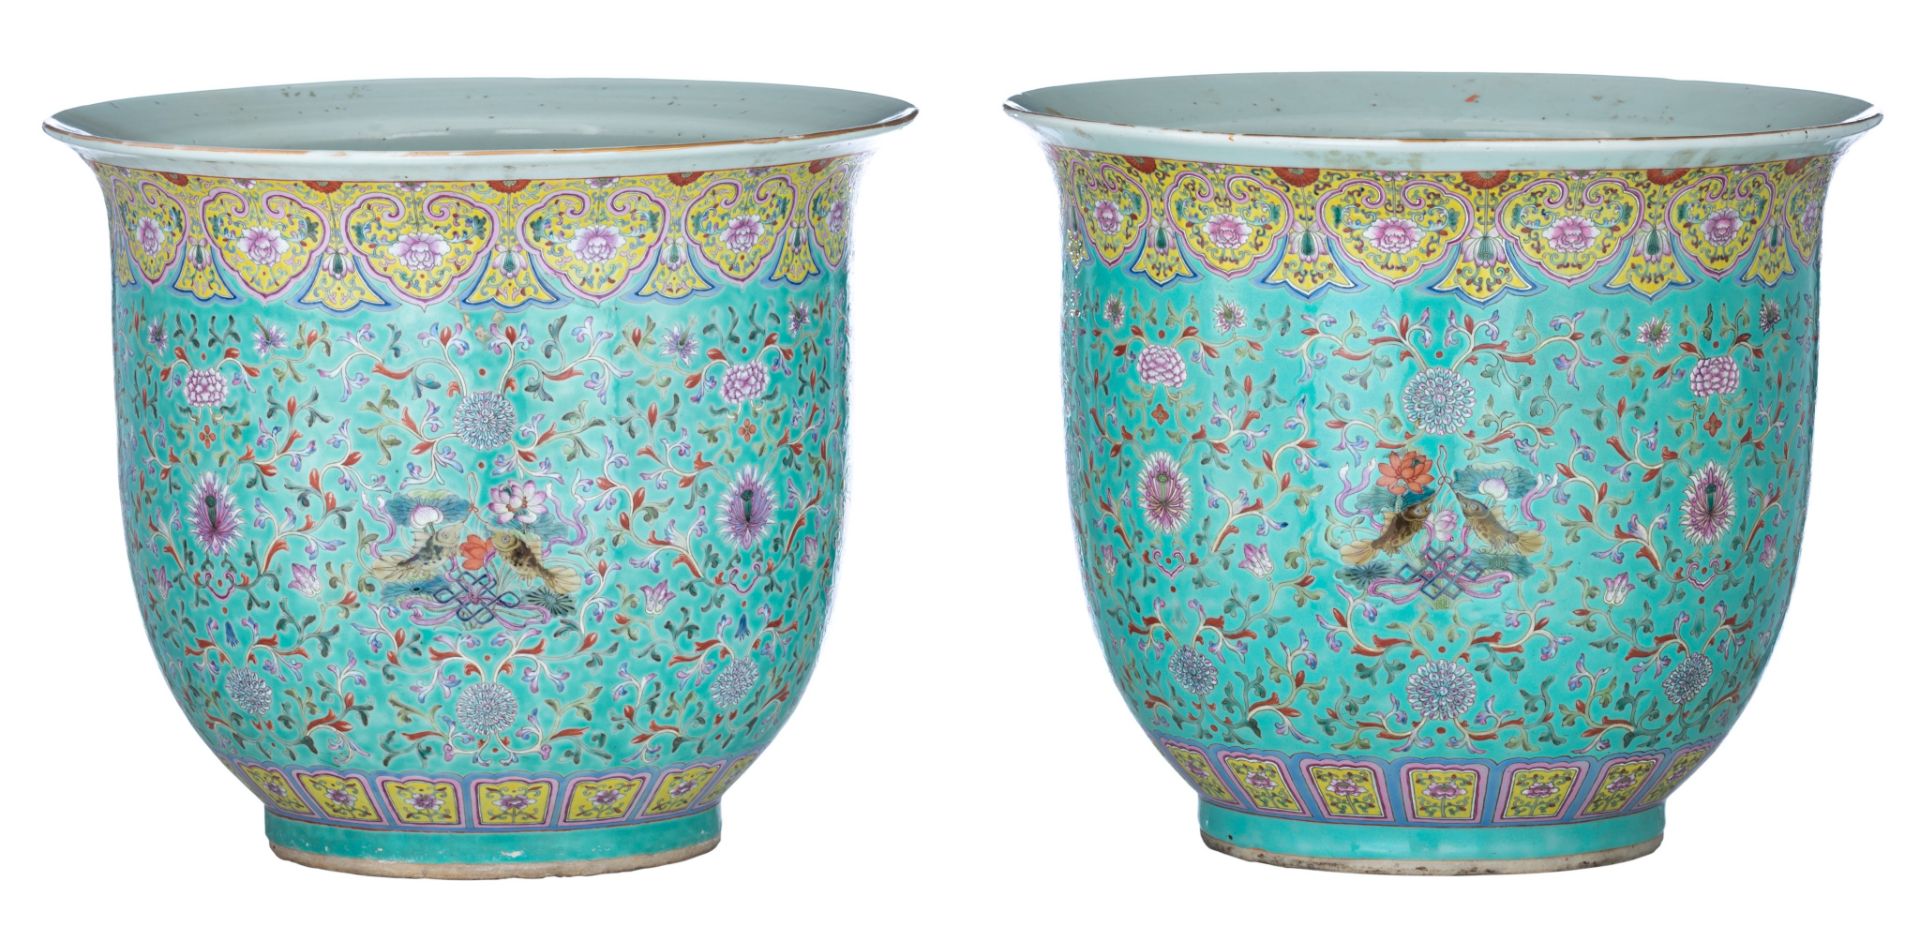 A pair of Chinese famille rose on turquoise ground jardinières, 19thC, H 33,5 cm